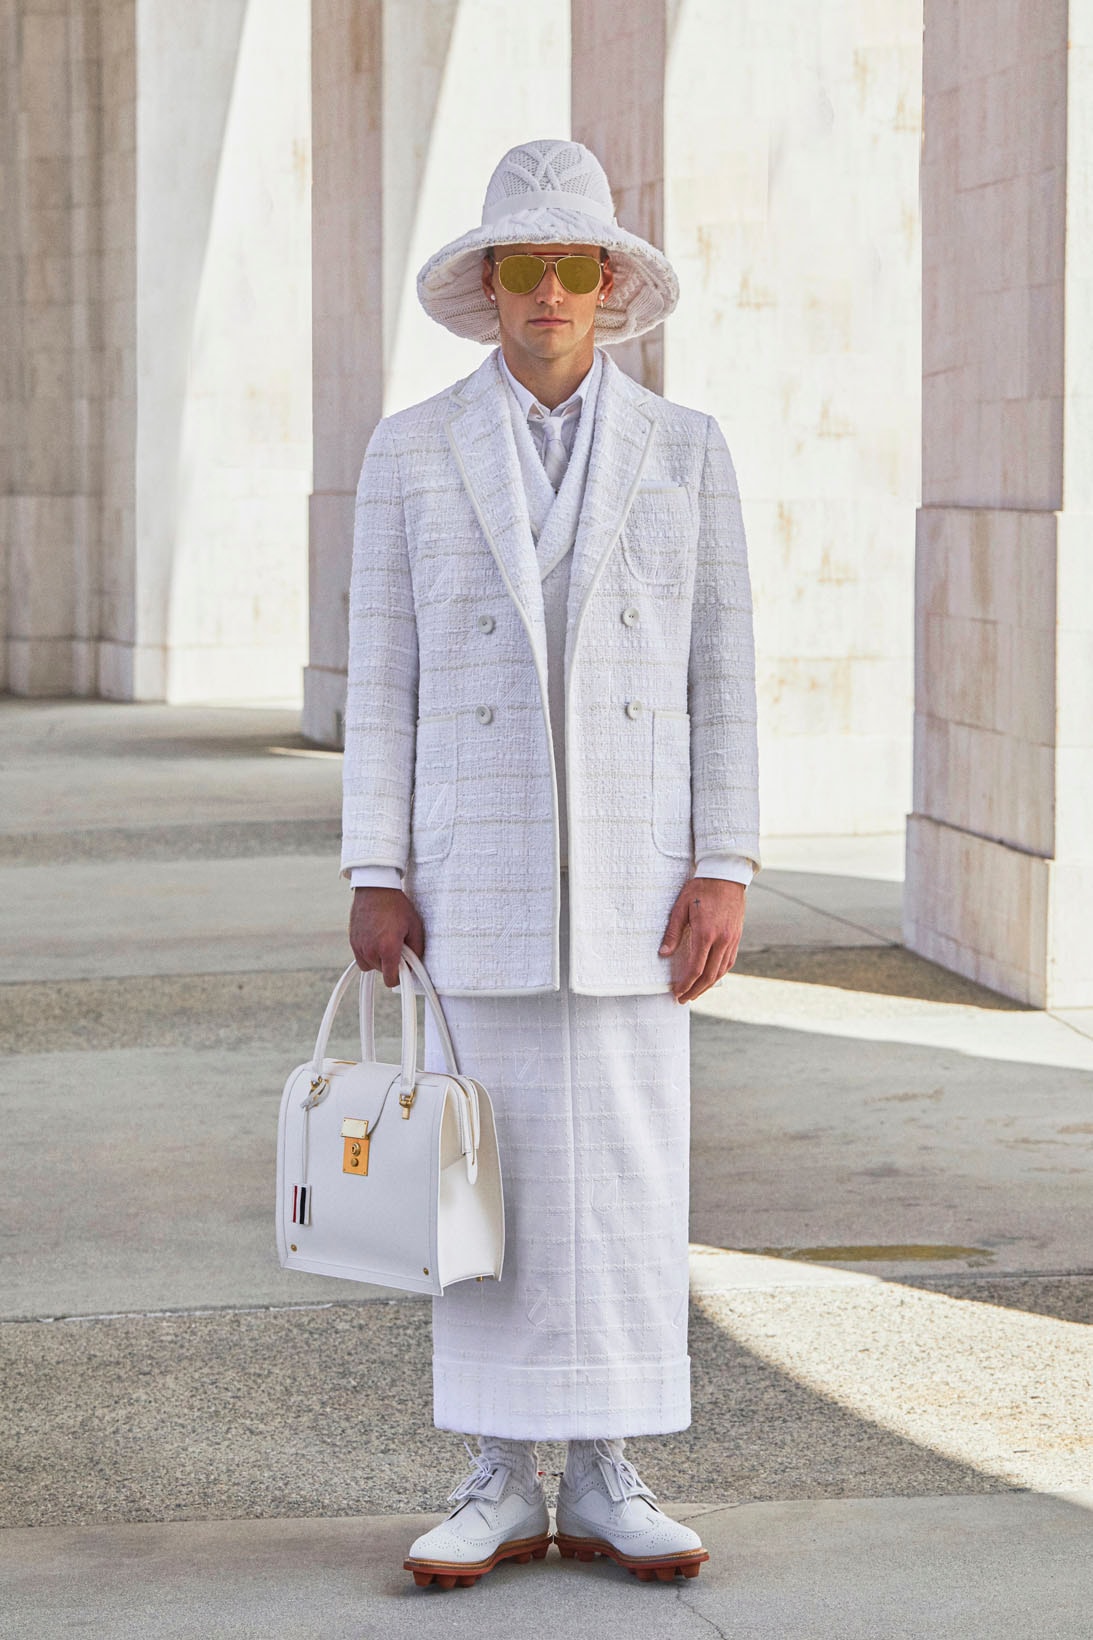 thom browne spring summer 2021 olympics all white oversized suits pleated skirts knitwear lookbook 